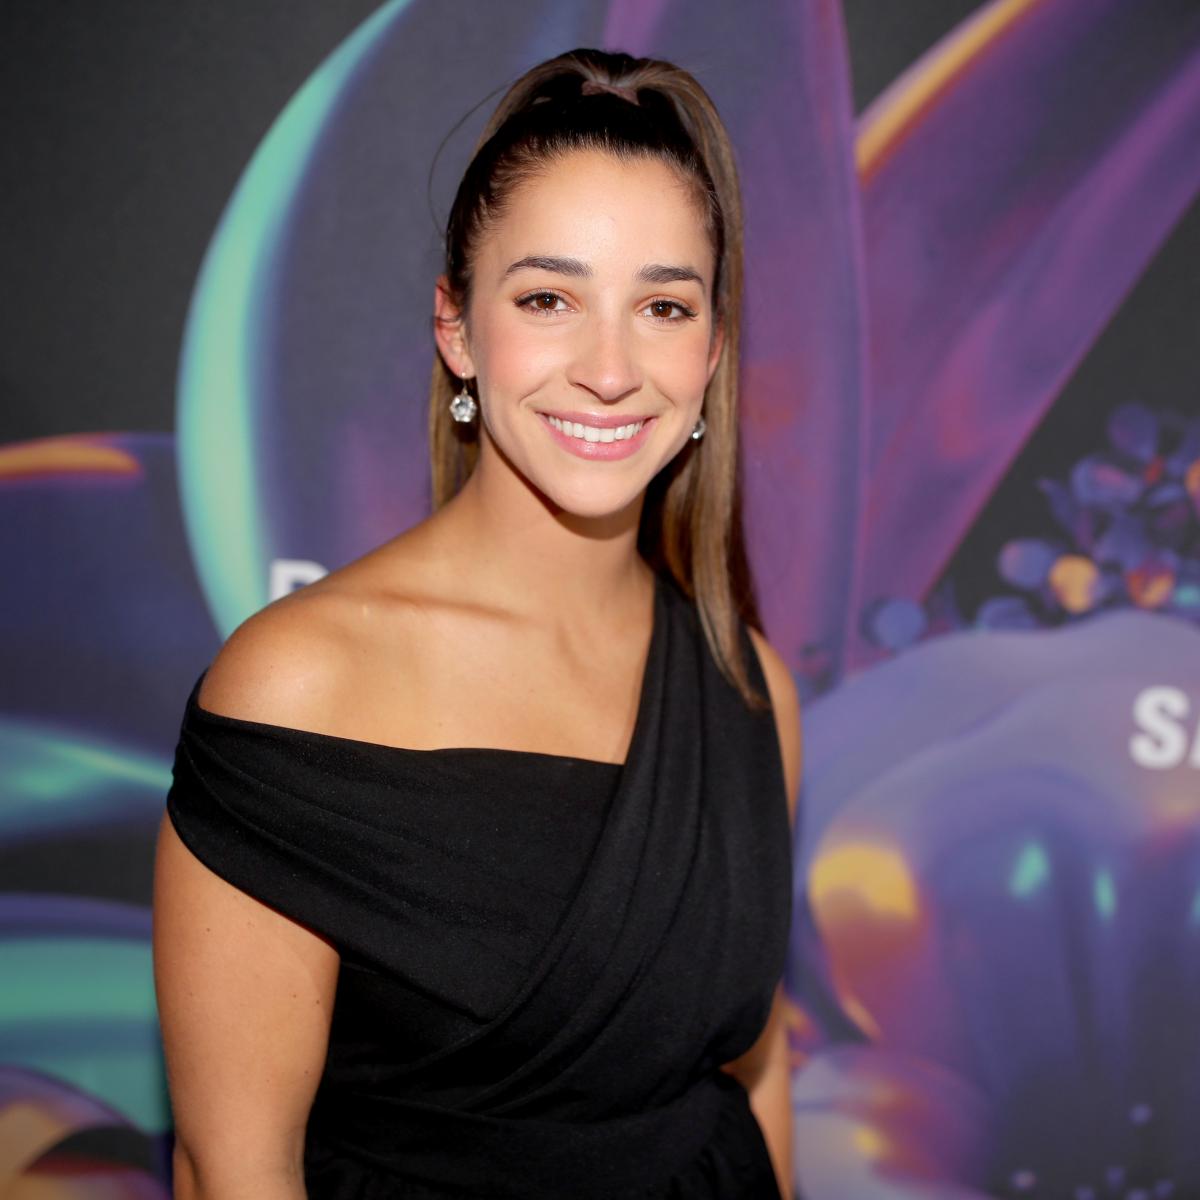 Aly Raisman Poses Nude for Sports Illustrated Swimsuit 